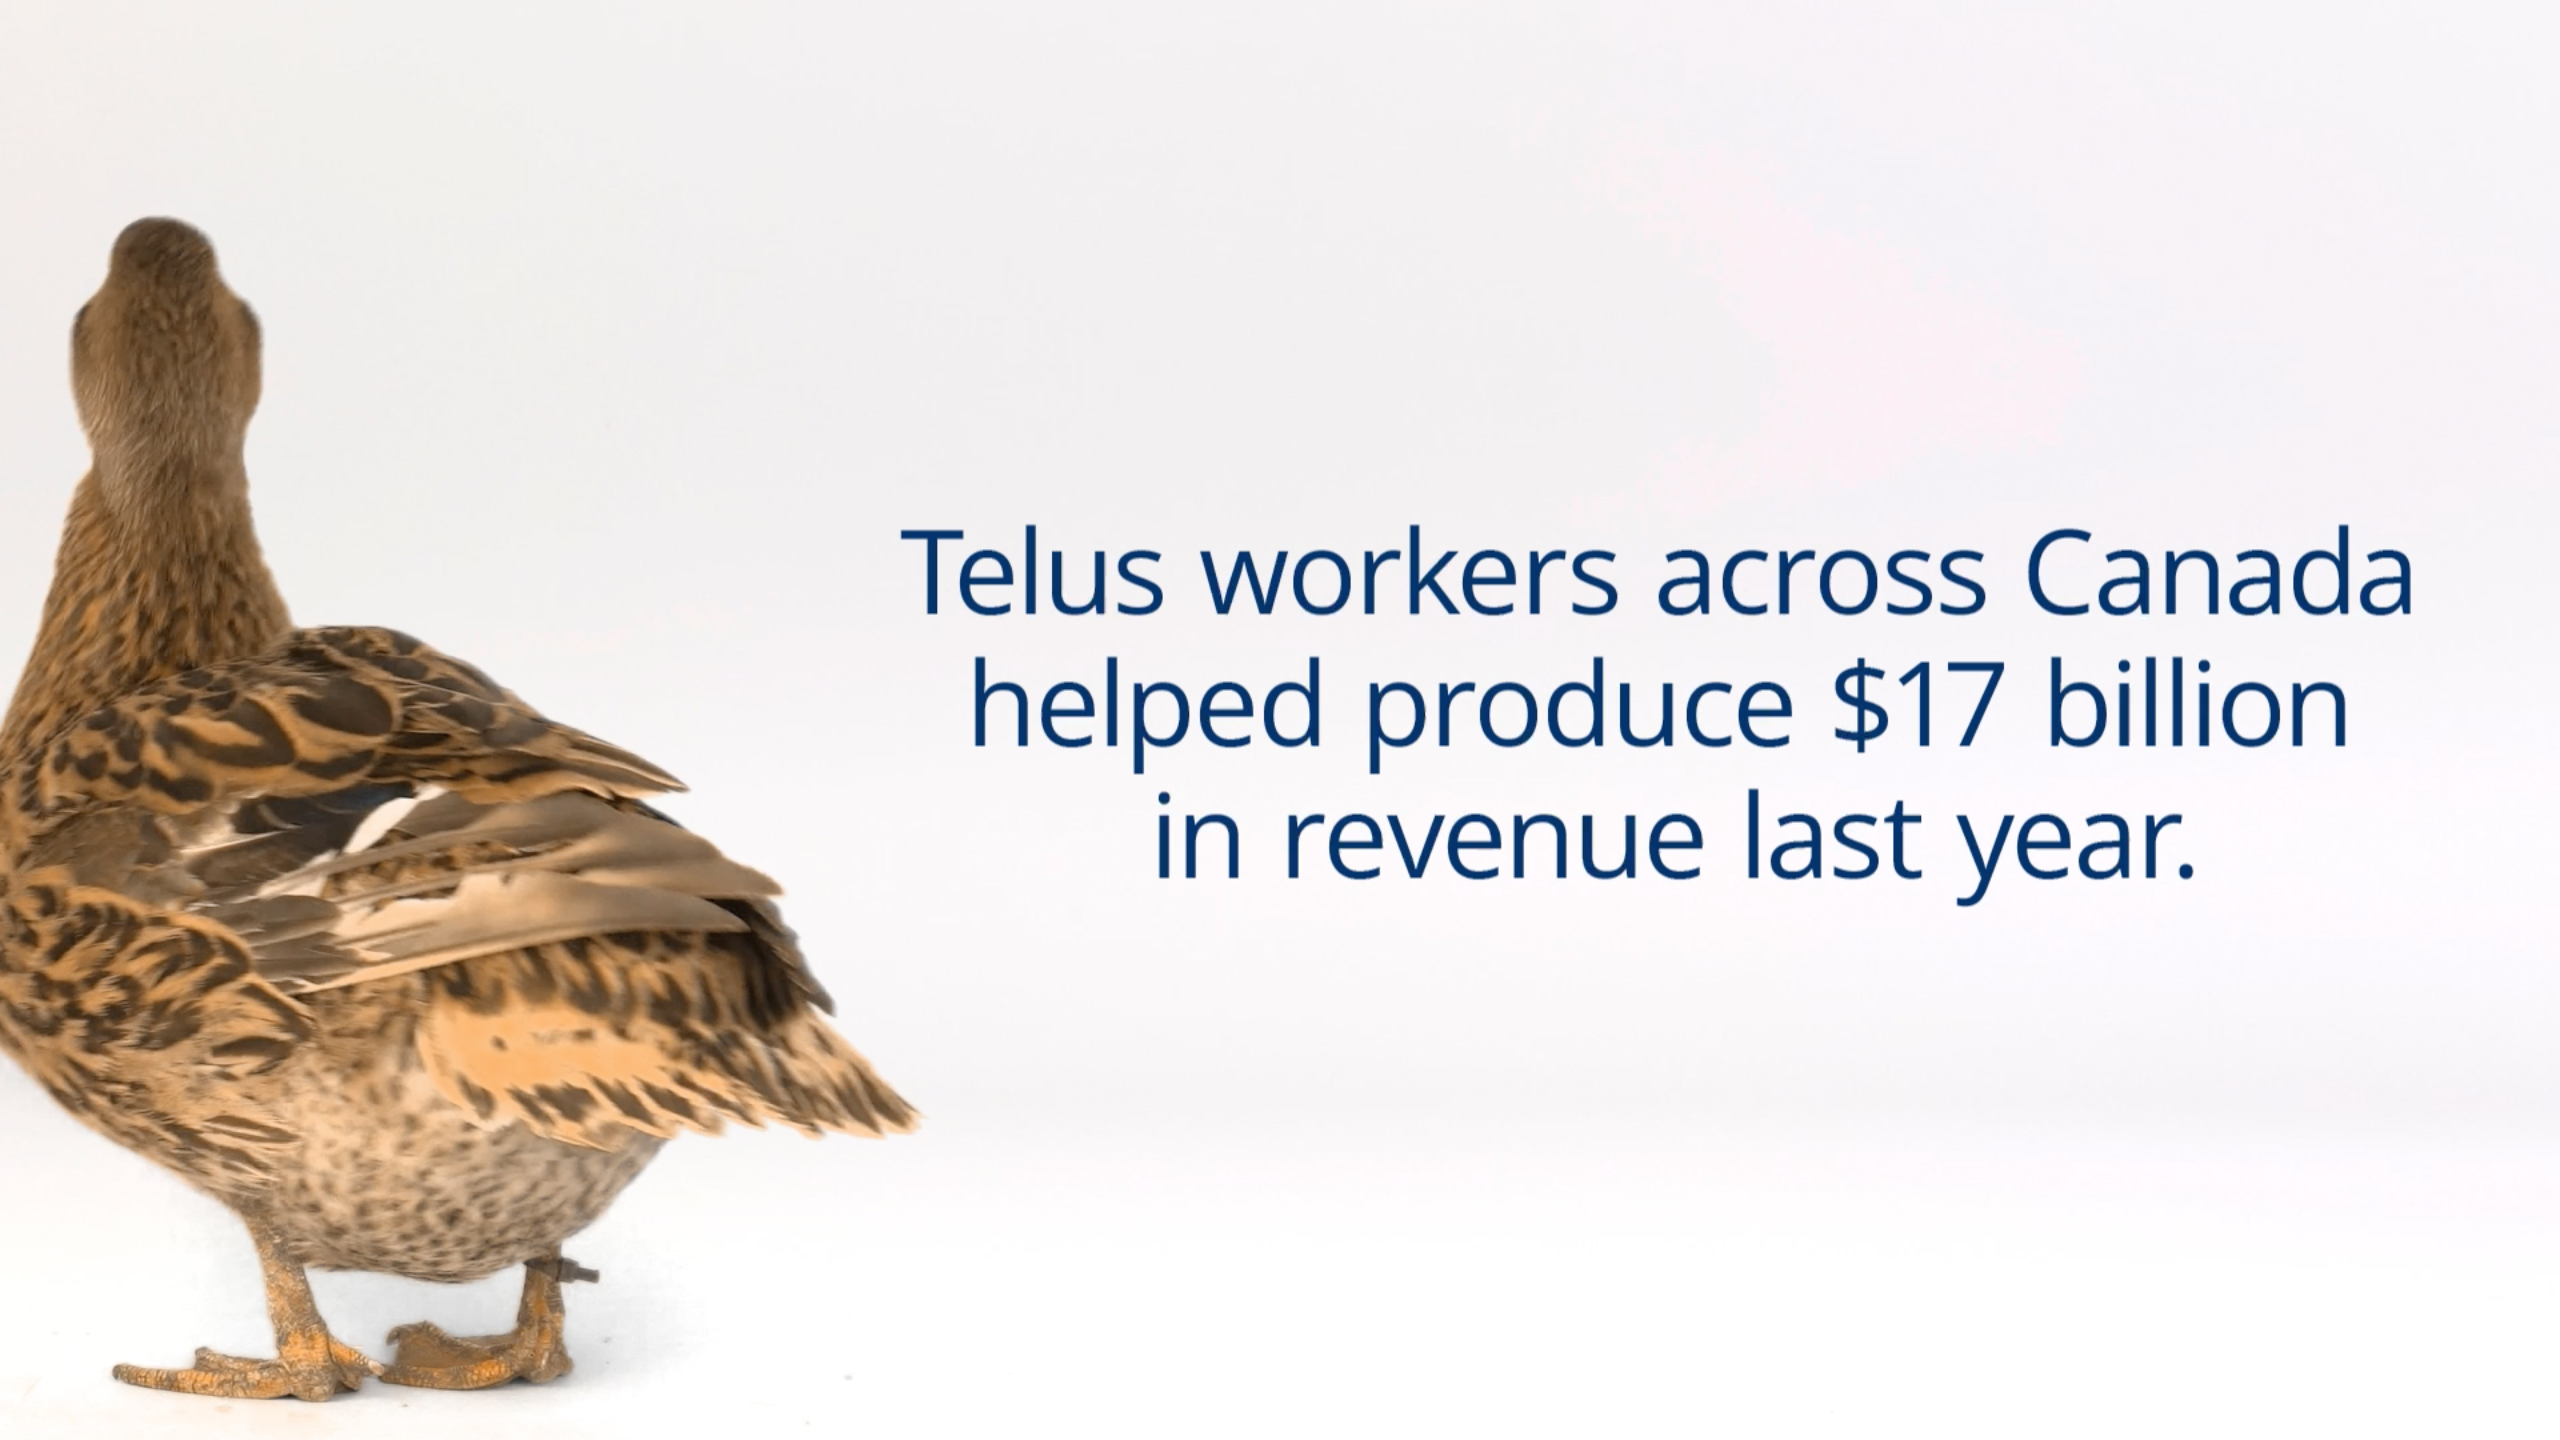 The image of a back of a duck which says Telus workers across Canada helped produce $17 billion in revenue last year.